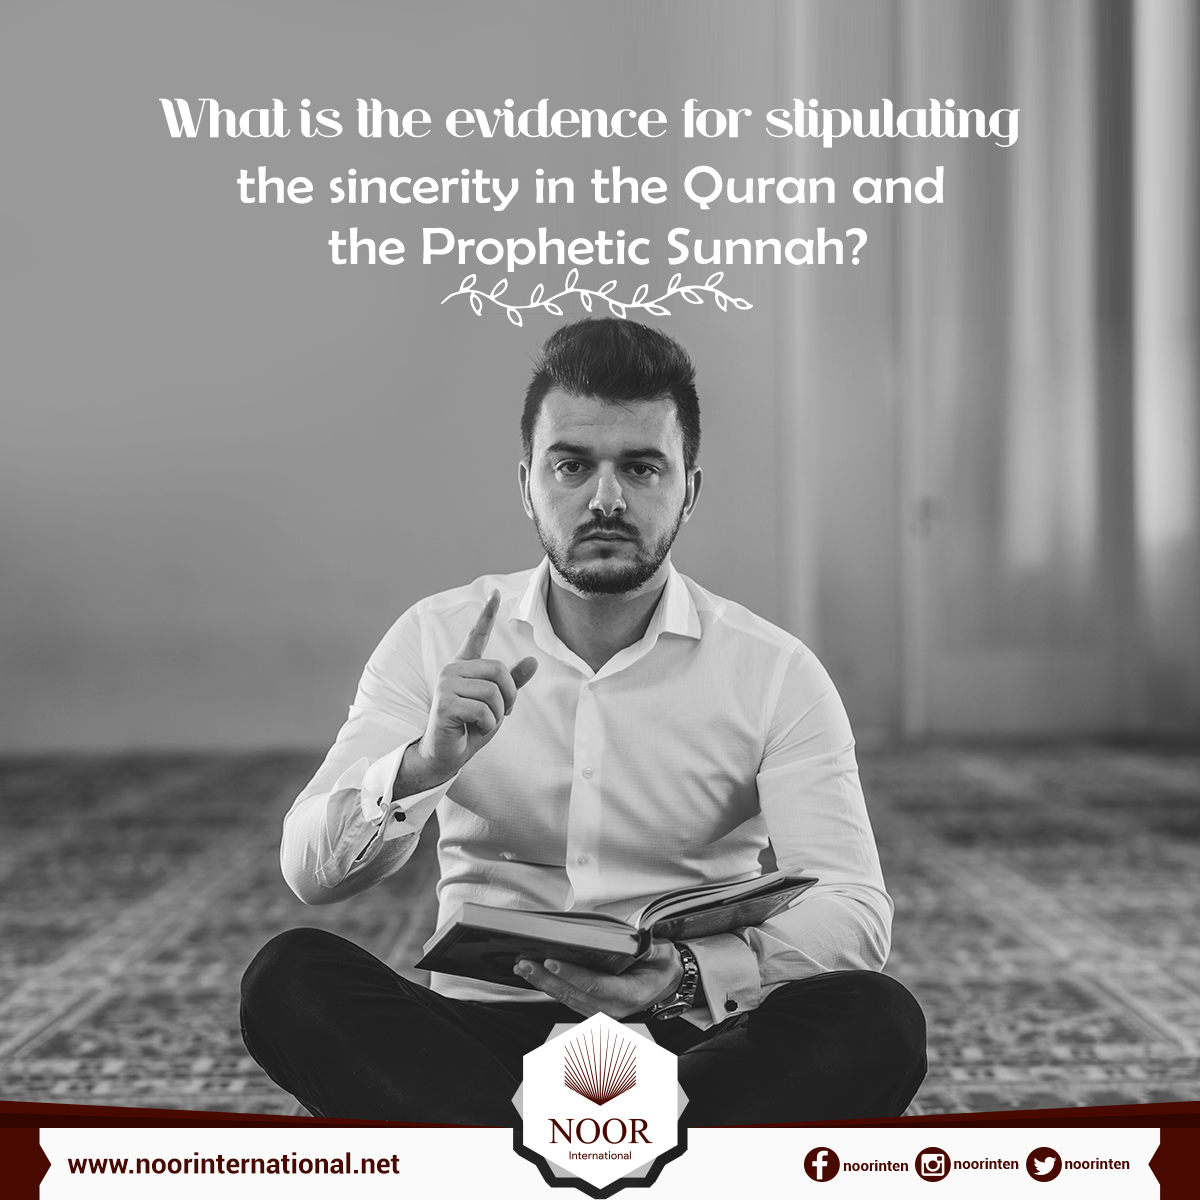 What is the evidence for stipulating the sincerity in the Quran and the Prophetic Sunnah?